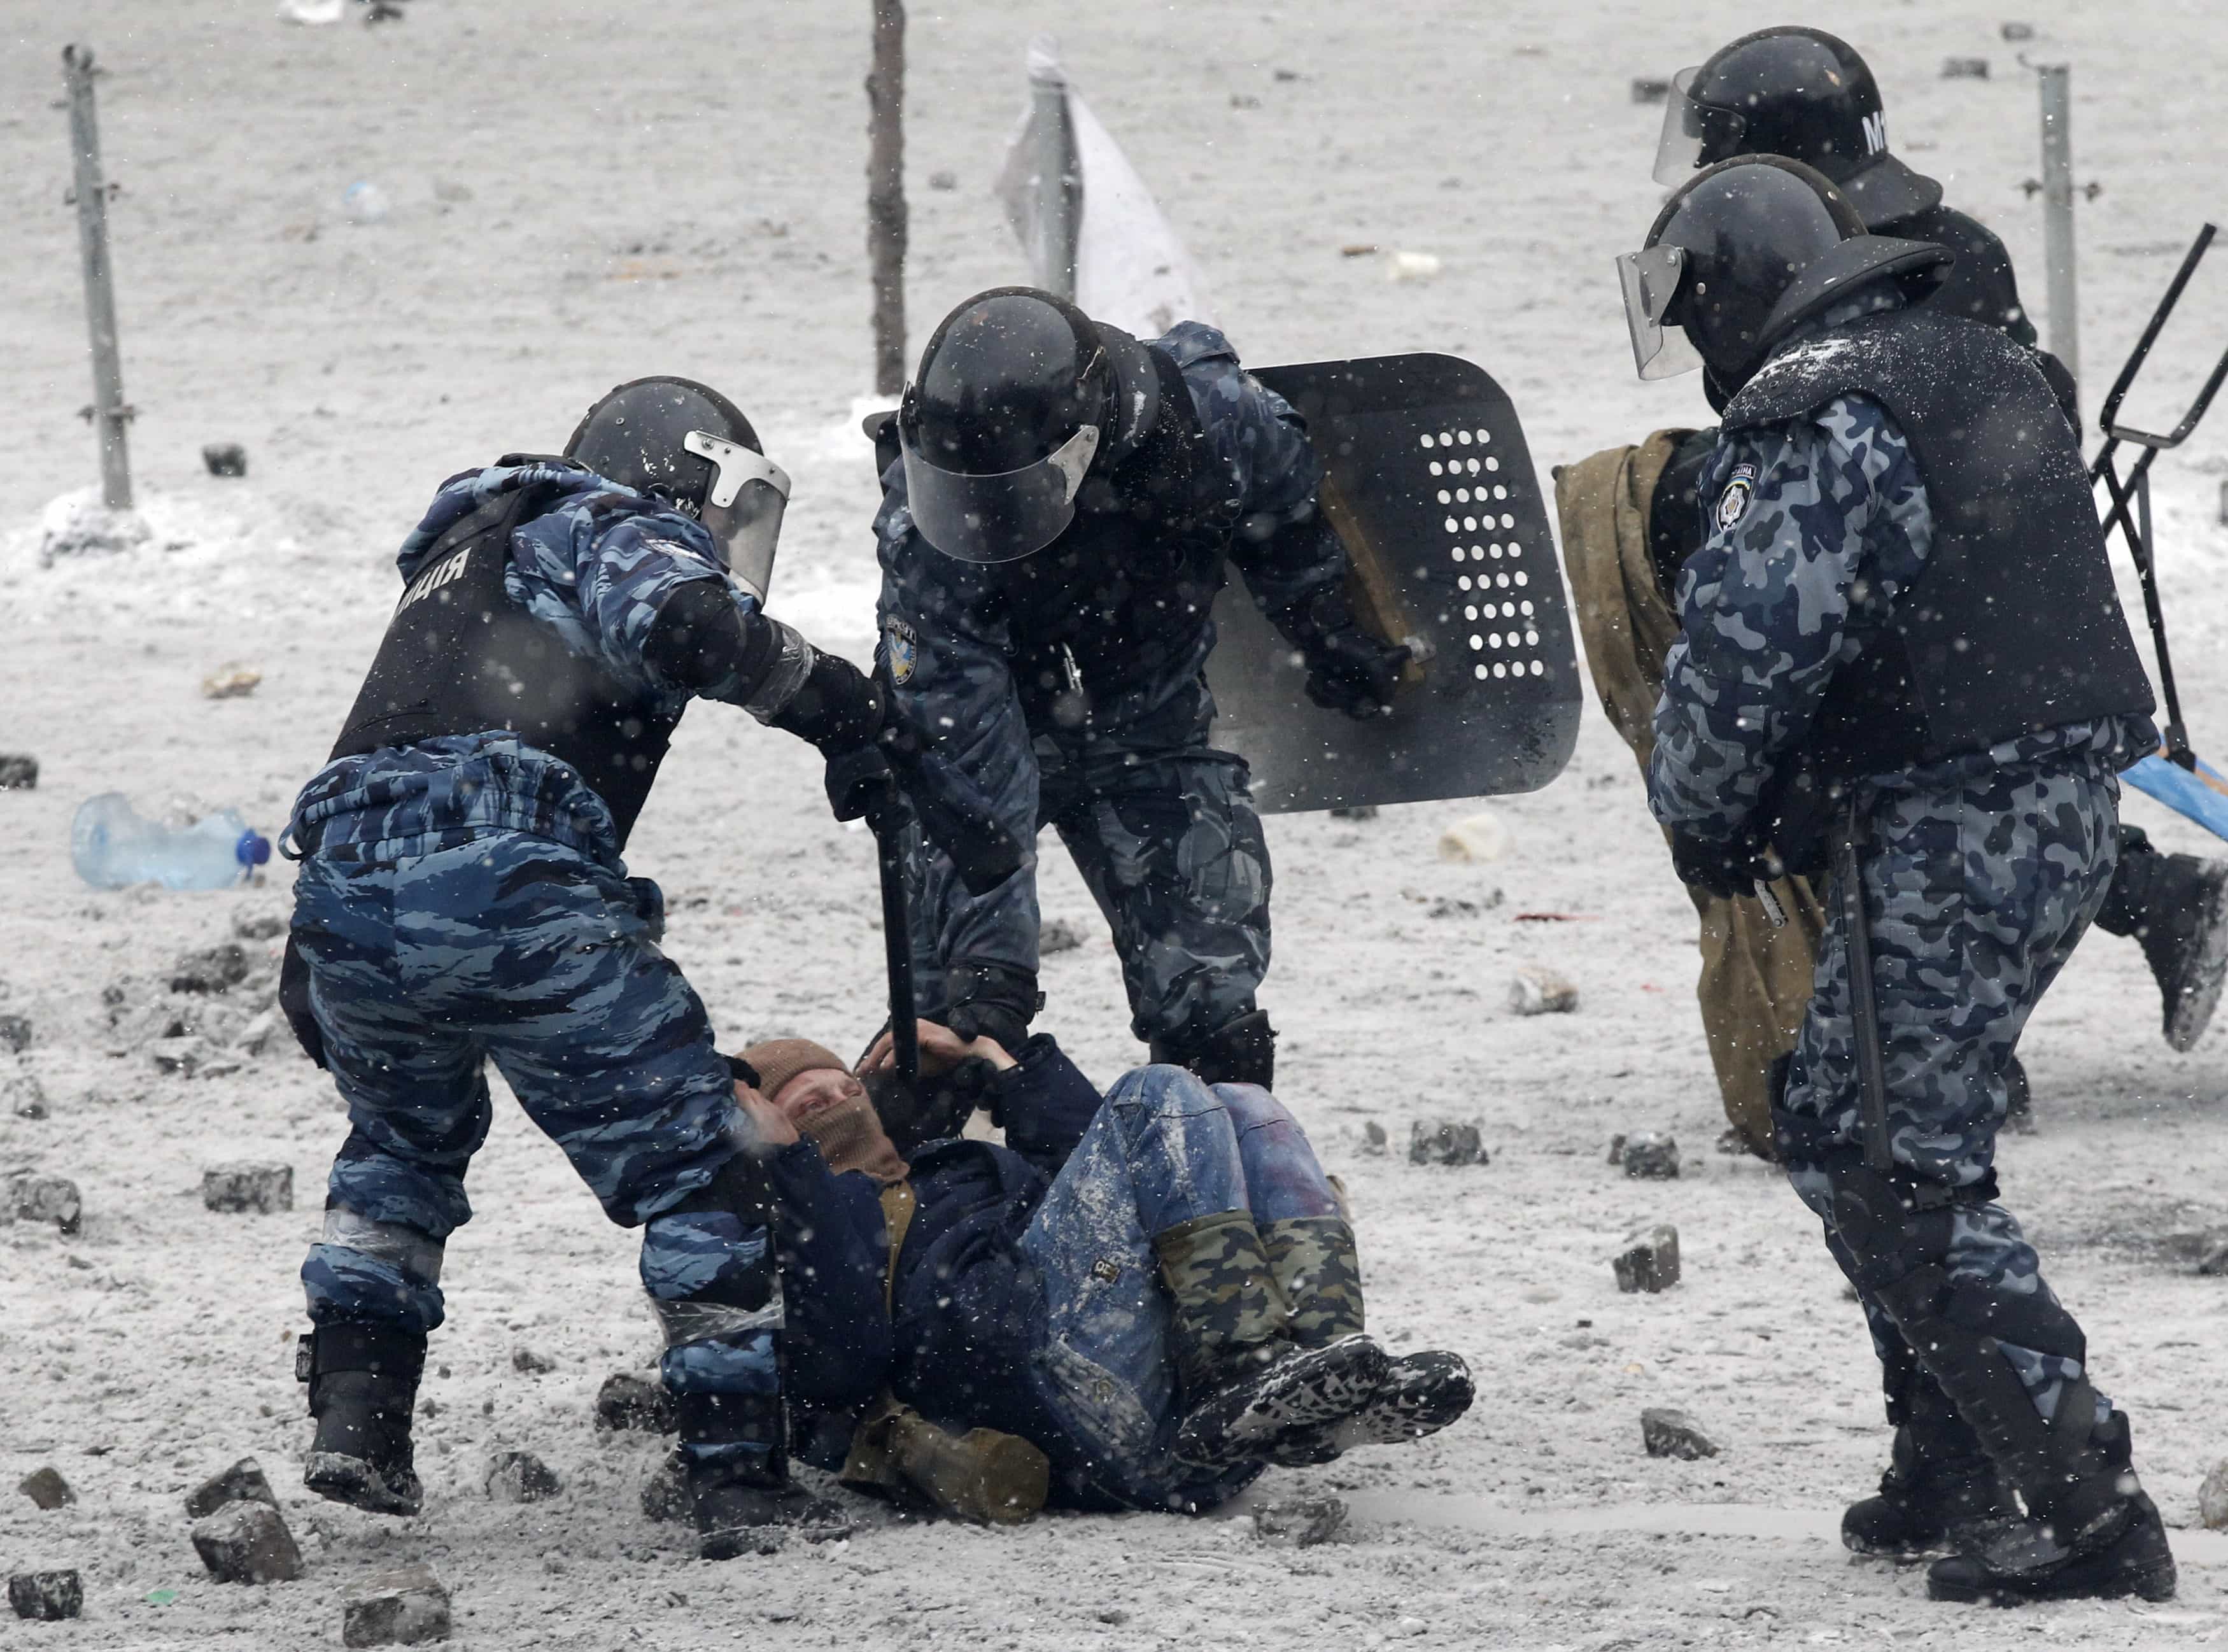 Riot police officers hold a man lying on the ground during clashes between police and pro-European protesters in Kiev, 22 January 2014., REUTERS/Vasily Fedosenko